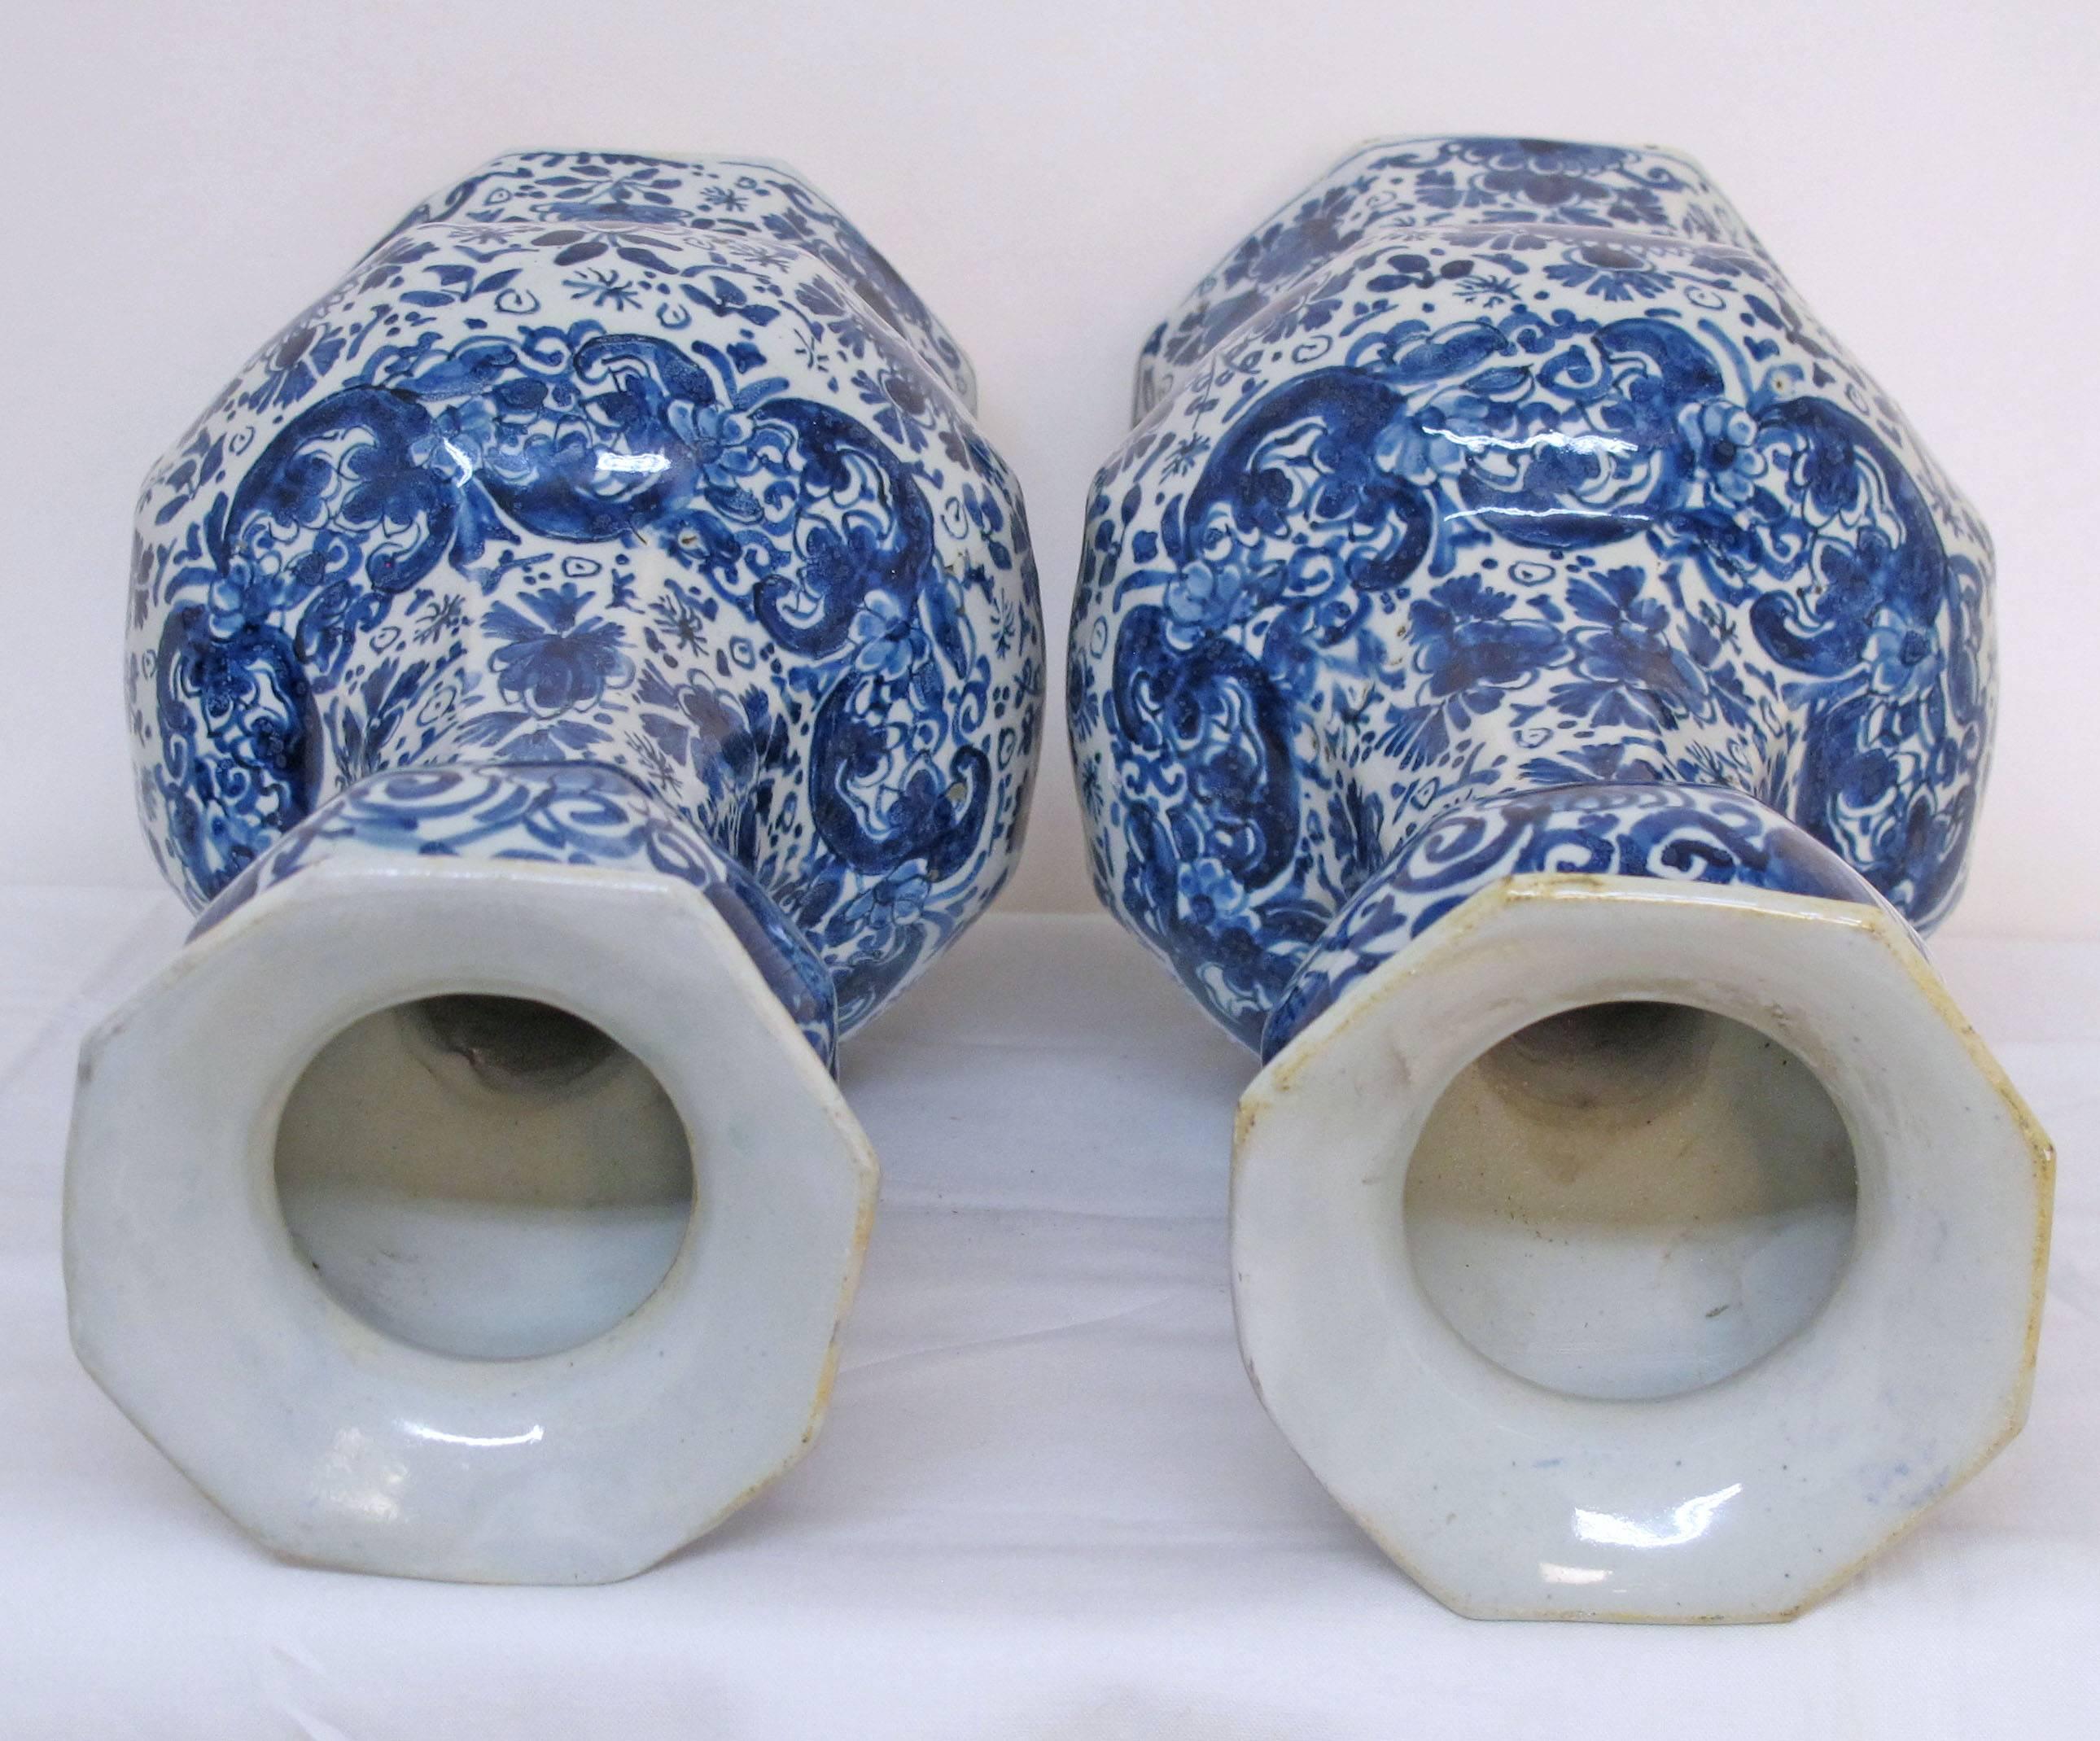  Pair 18th Century Delft Faience Blue and White Vases 1